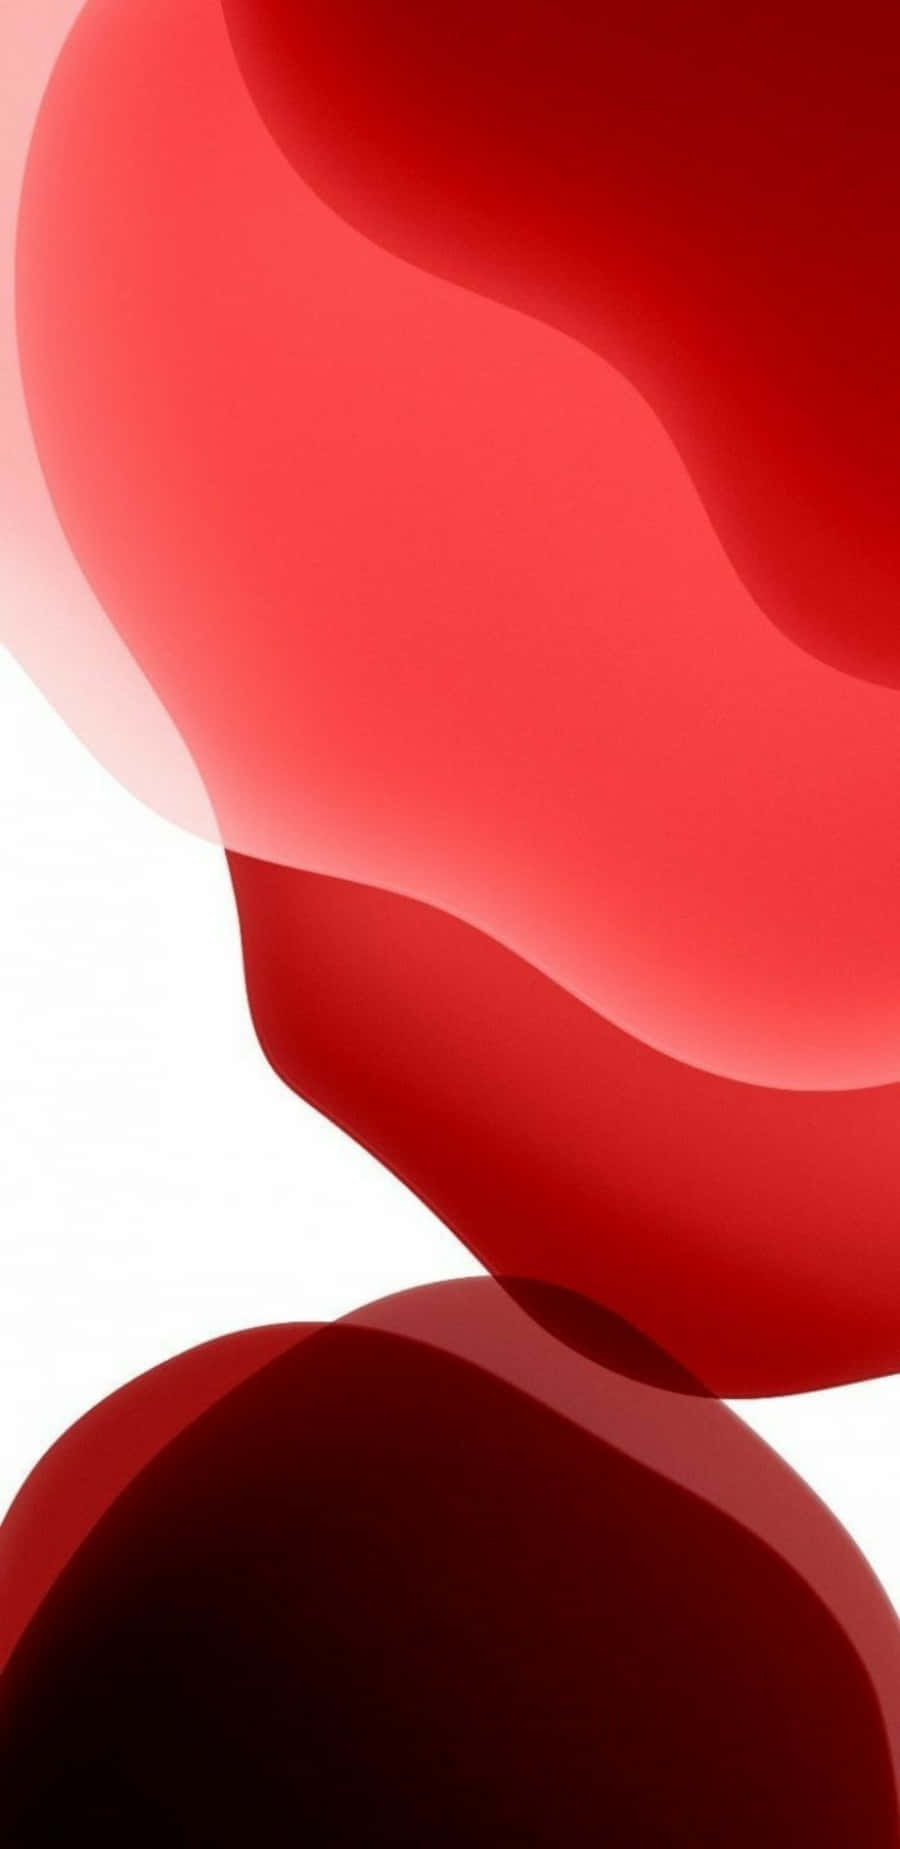 A Red Abstract Painting On A White Background Wallpaper